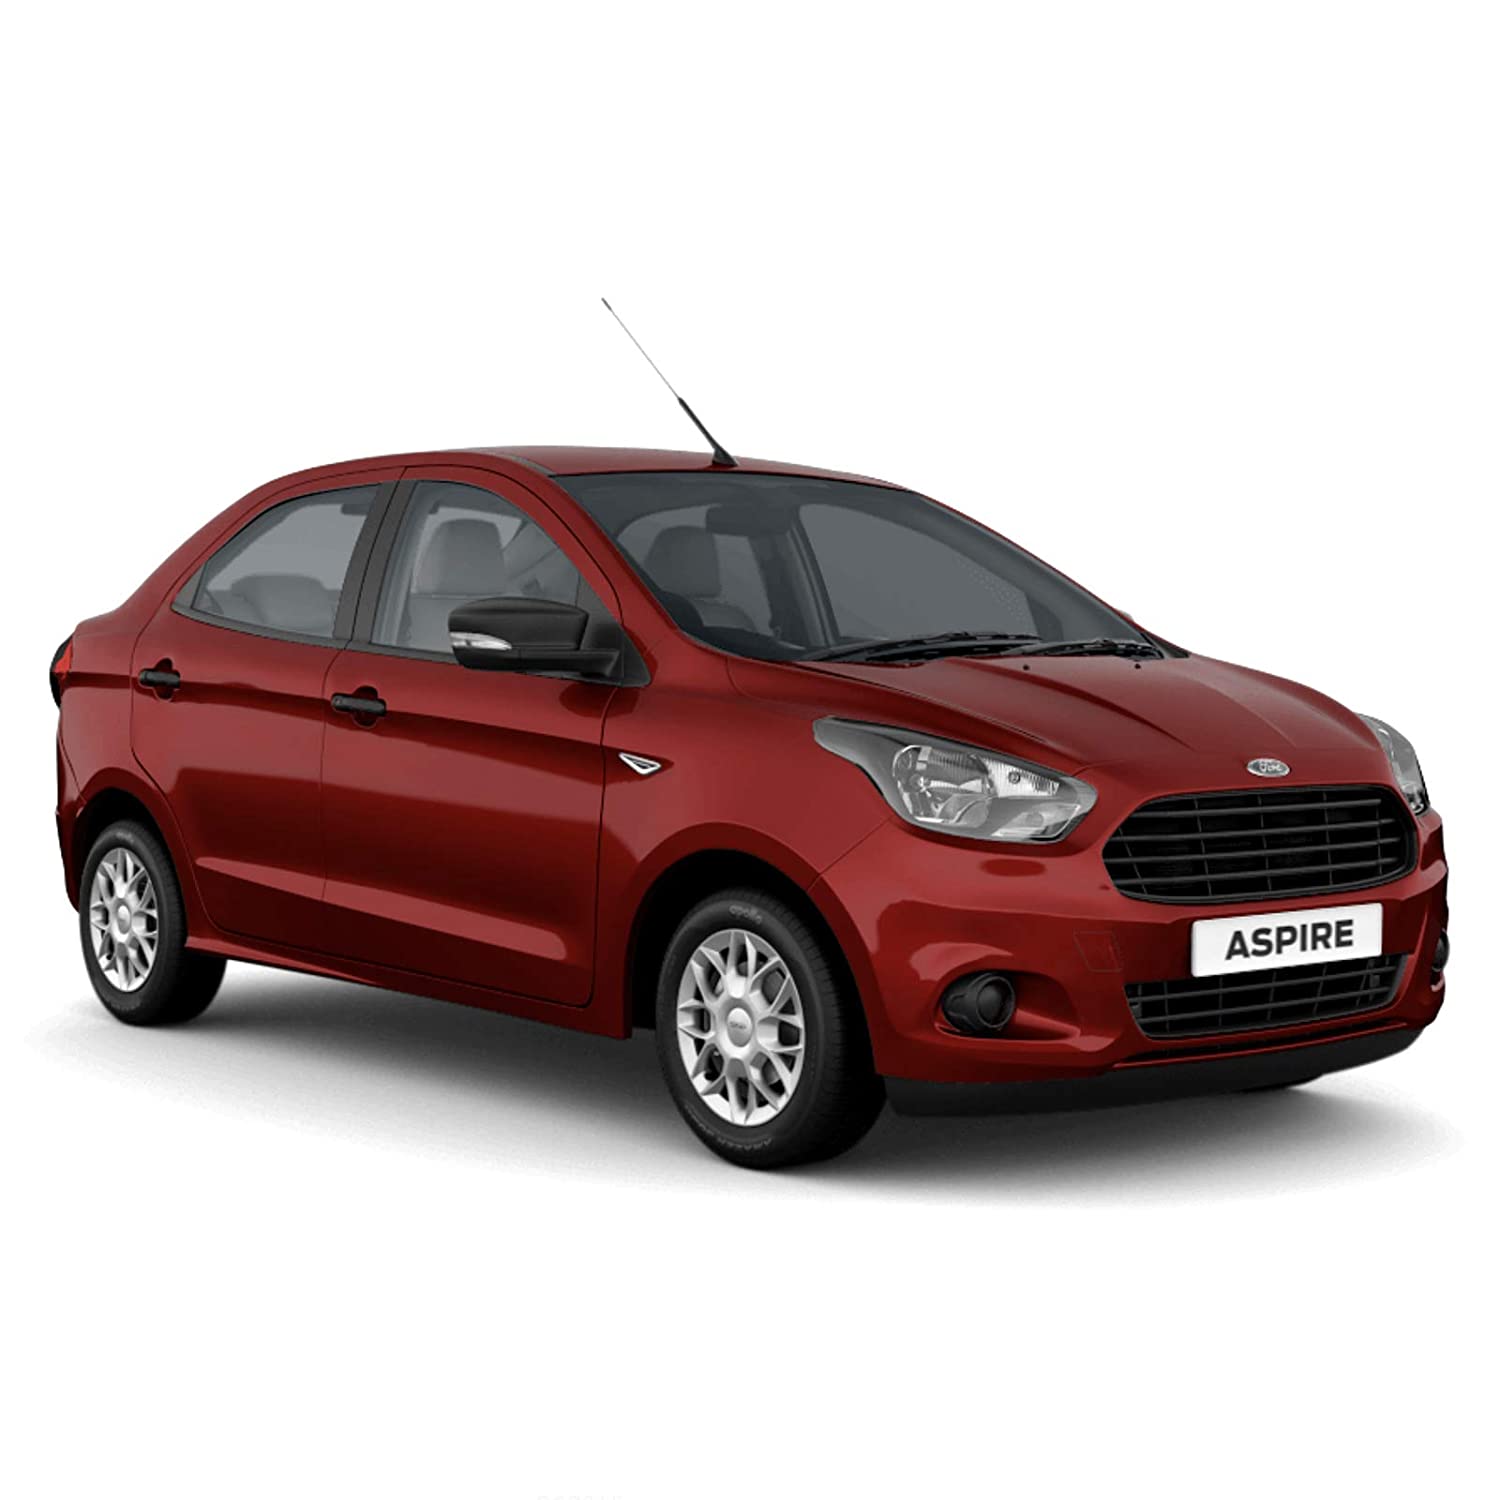 Ford Aspire 1.5D Titanium MT Diesel (Ruby Red, Booking Only) : Amazon.in:  Car & Motorbike